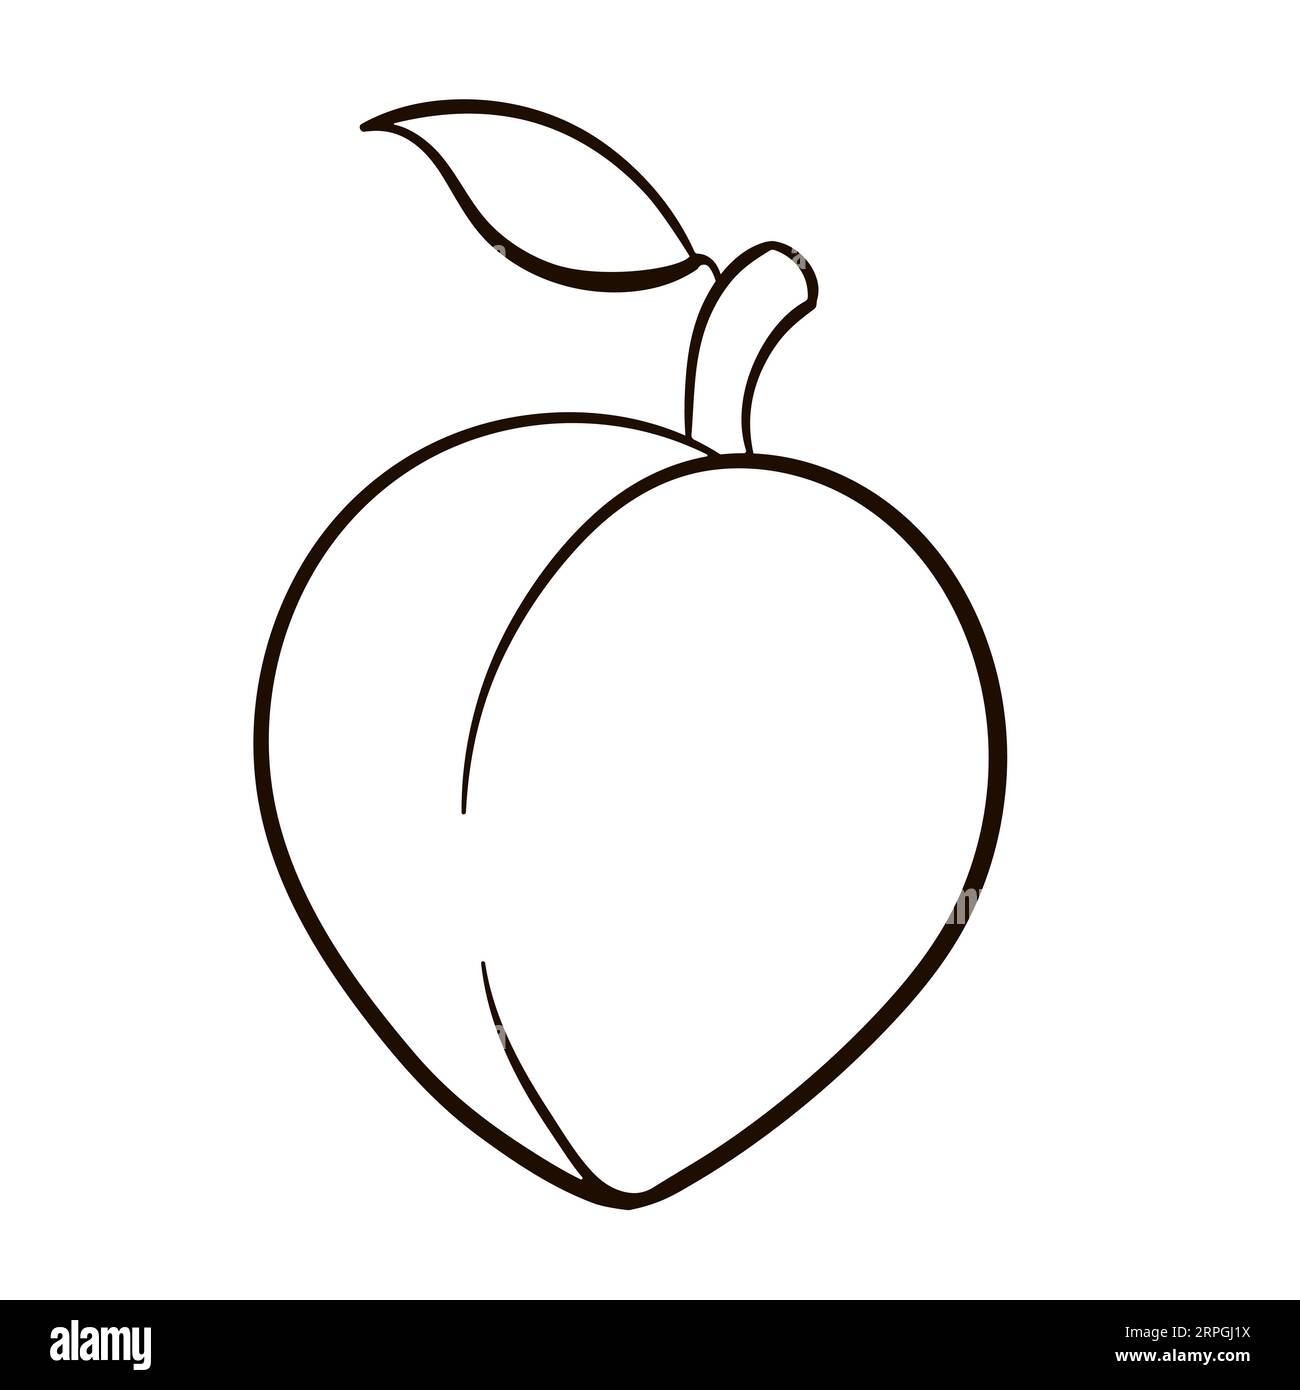 Line drawing of whole healthy organic peach for orchard logo identity. Line art vector icon. Stock Vector